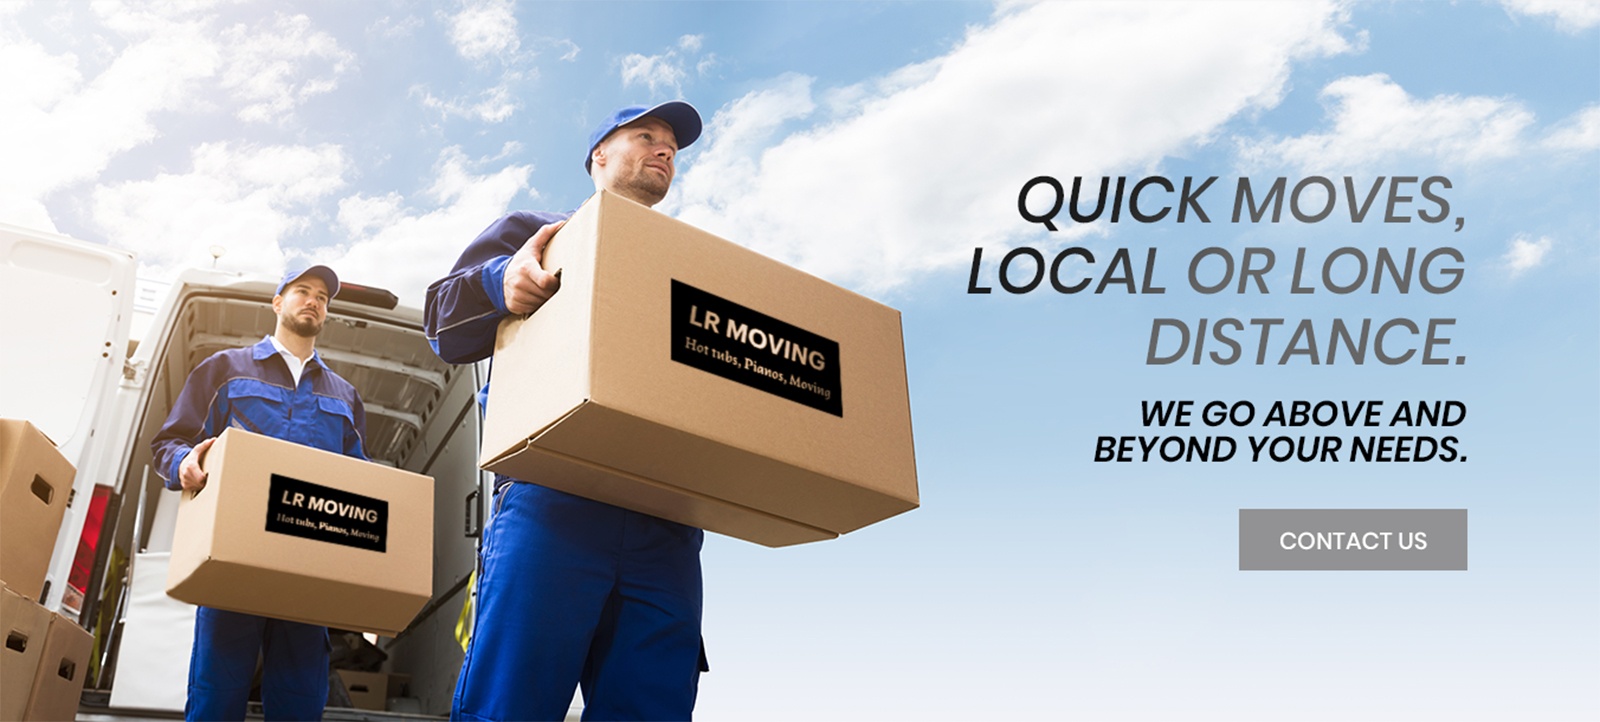 Quick Moves, Local or Long Distance by LR Moving and Deliveries - We Go Above and Beyond Your Needs